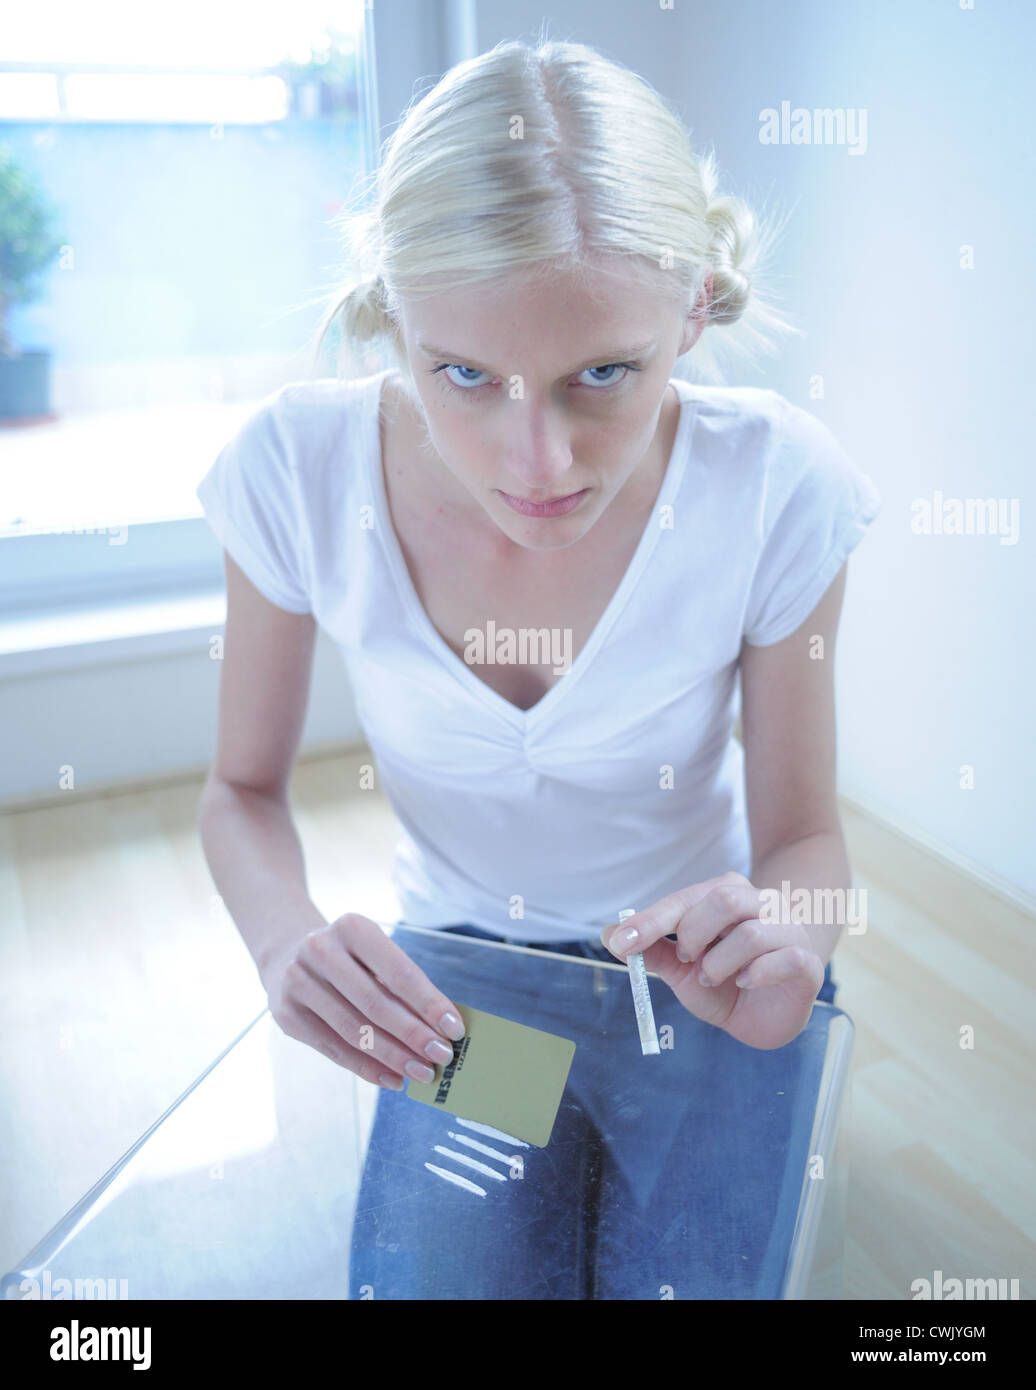 Young woman sniffing drug Stock Photo